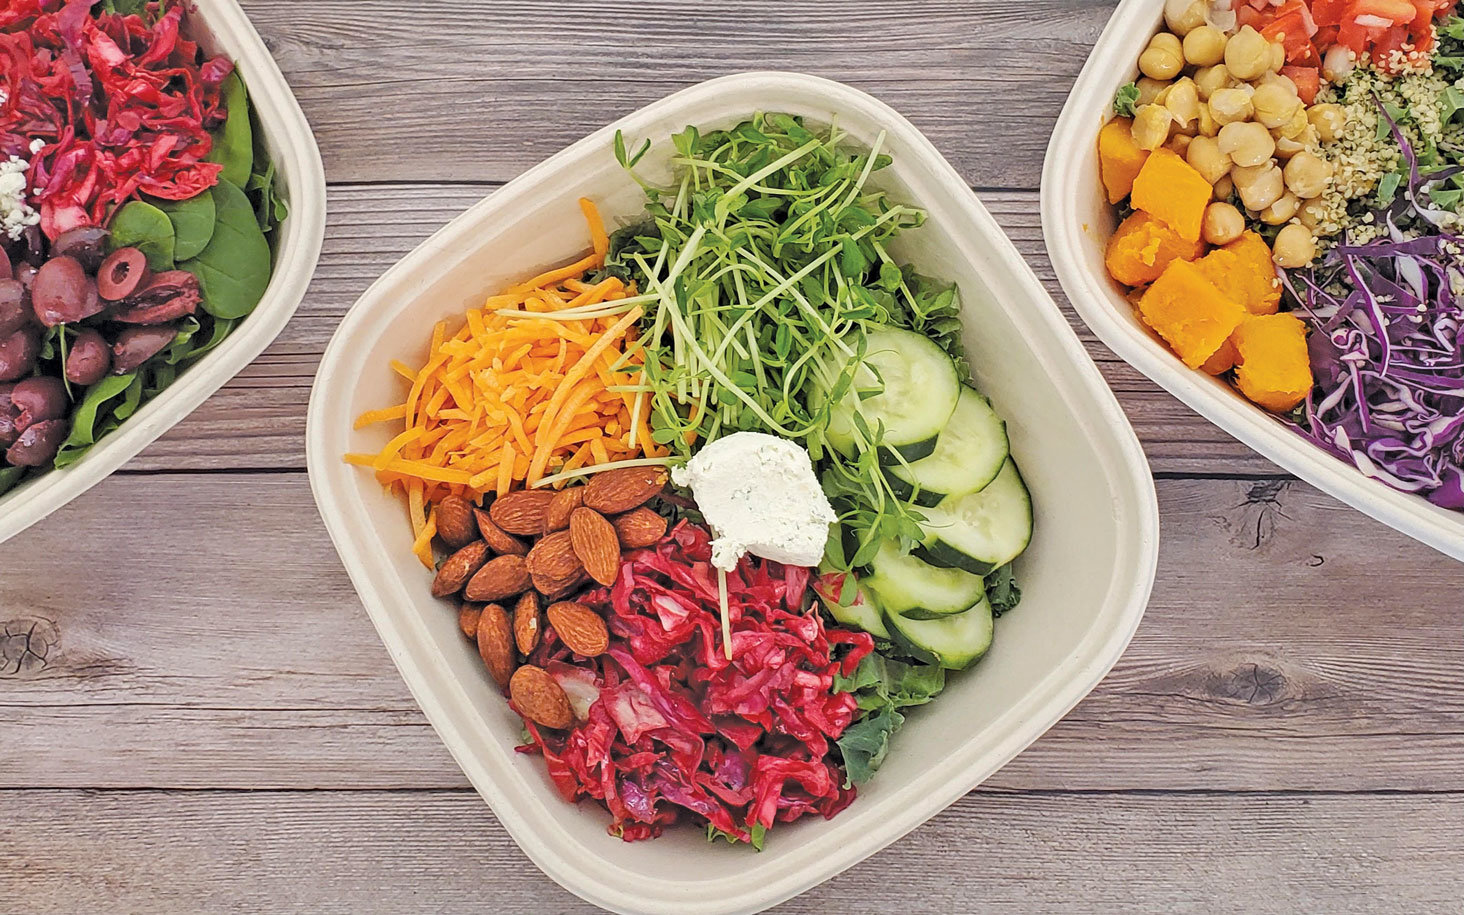 Hot and cold bowls, like these shown here, are a top seller at the store, which offers a bowl station and prepared-foods case featuring foods for traditional and alternative diets.